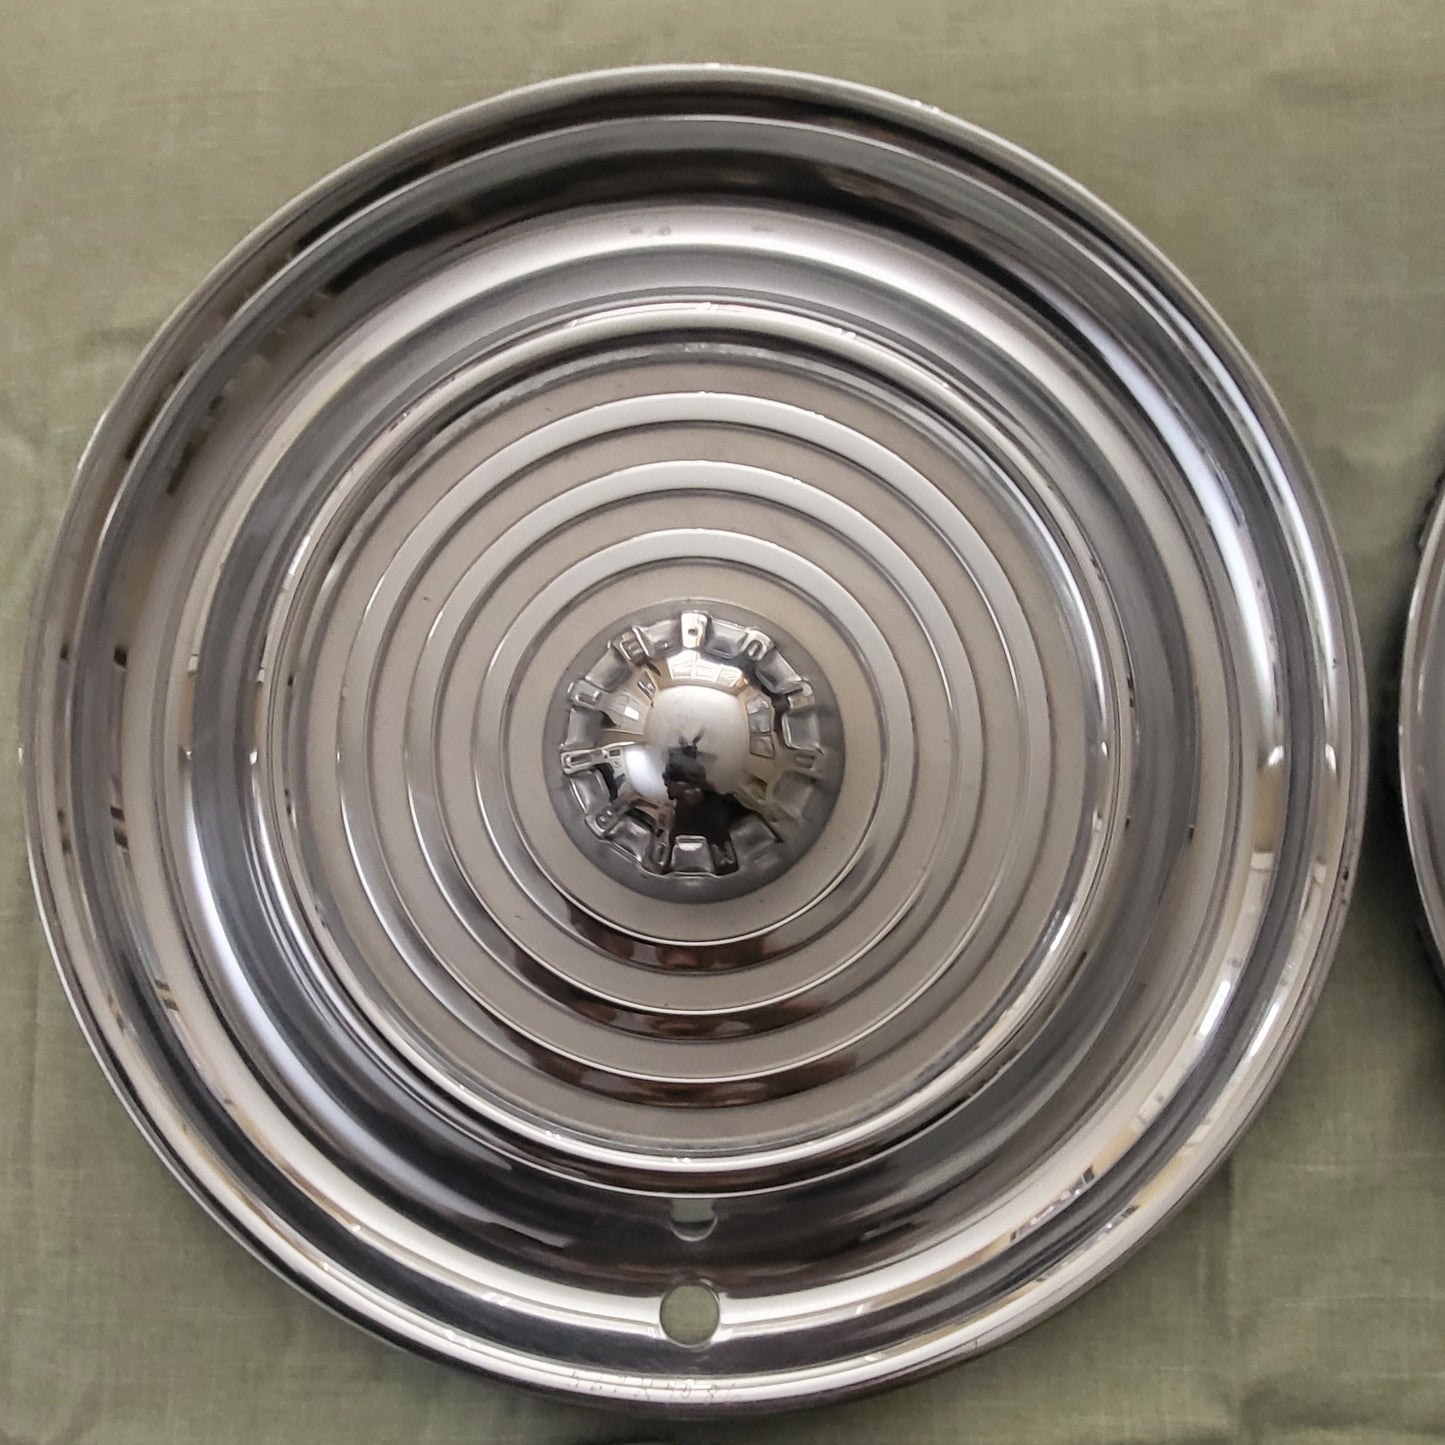 1956 Oldsmobile 88 Holiday Fiesta 15" Wheel Covers Hubcaps Excellent Original